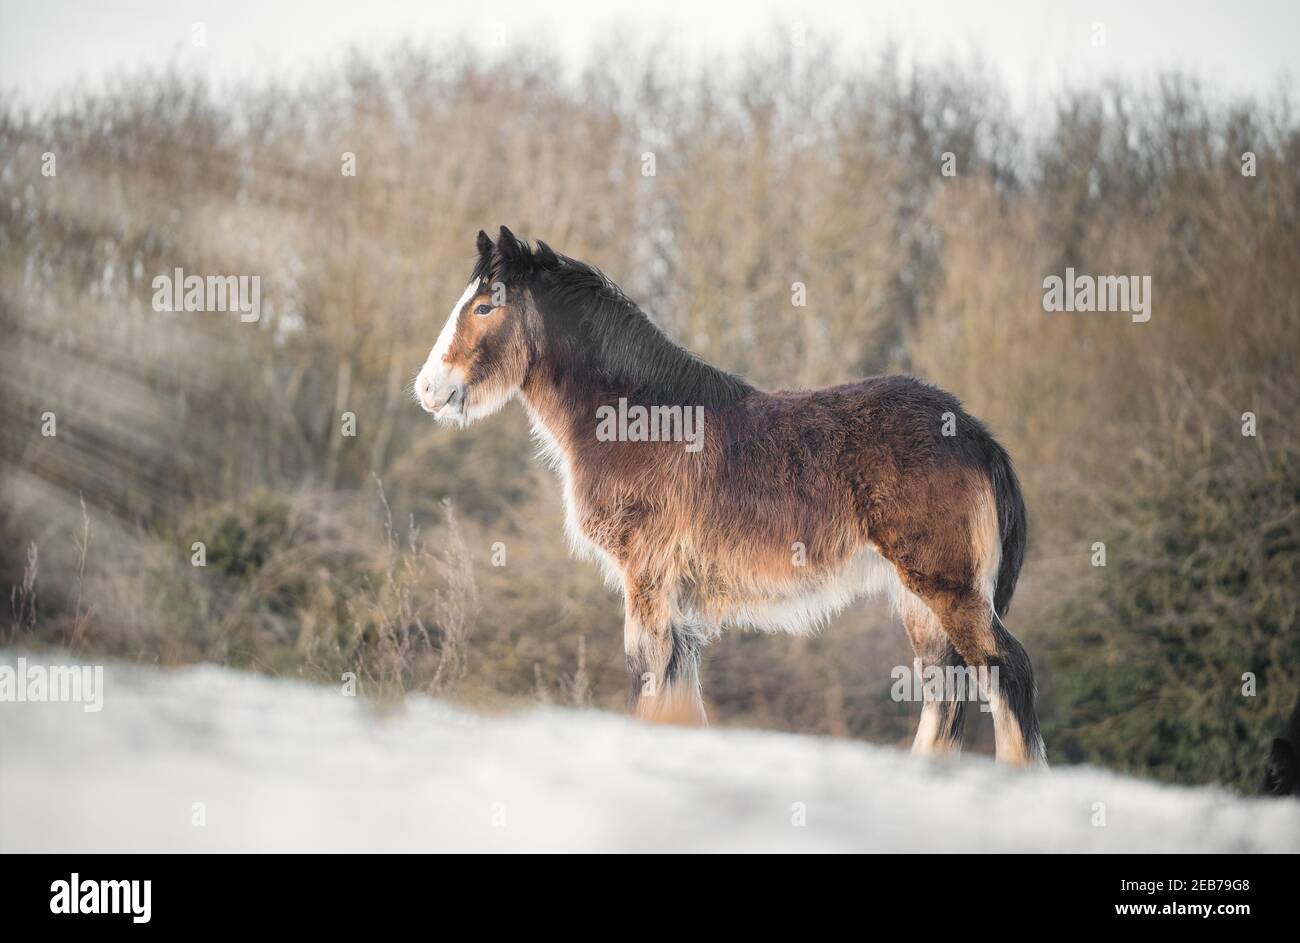 Beautiful big Irish Gypsy Cob horse foal standing wild in snow field on ground looking towards camera cold deep snowy winter landscape at sunset Stock Photo